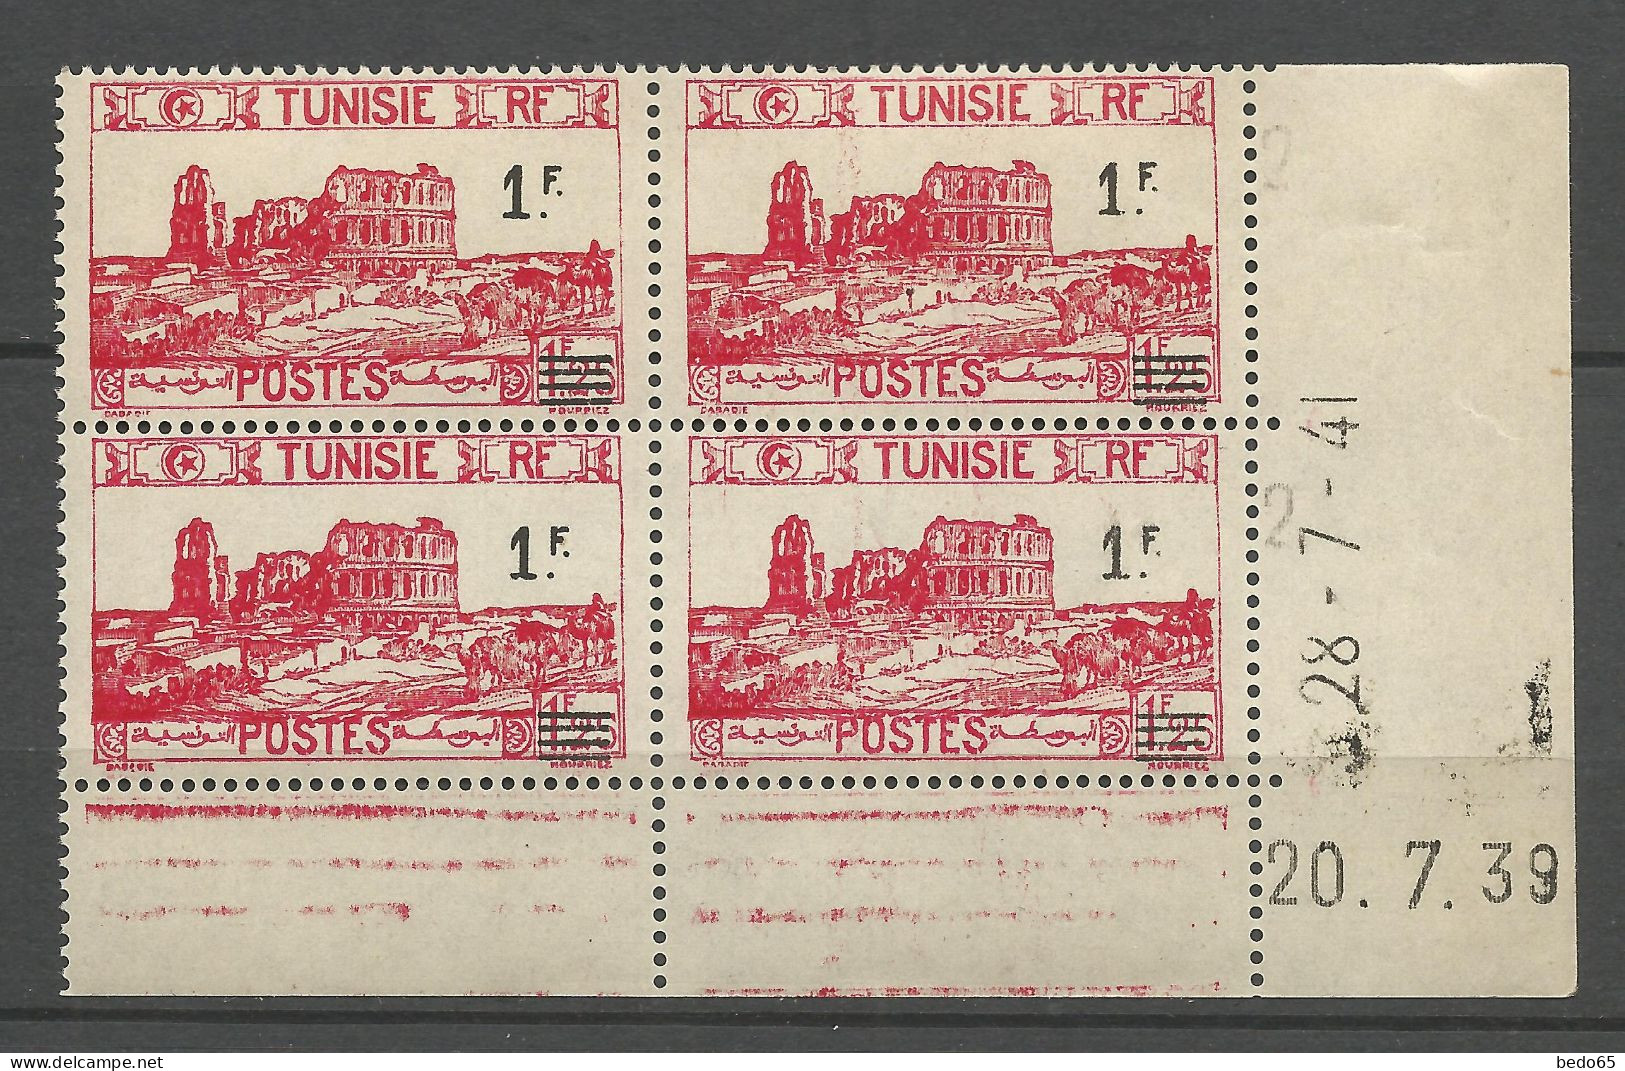 TUNISIE N° 224 Coin Daté 28.7.41 Surcharge Recto Verso NEUF**  SANS CHARNIERE / Hingeless / MNH - Unused Stamps